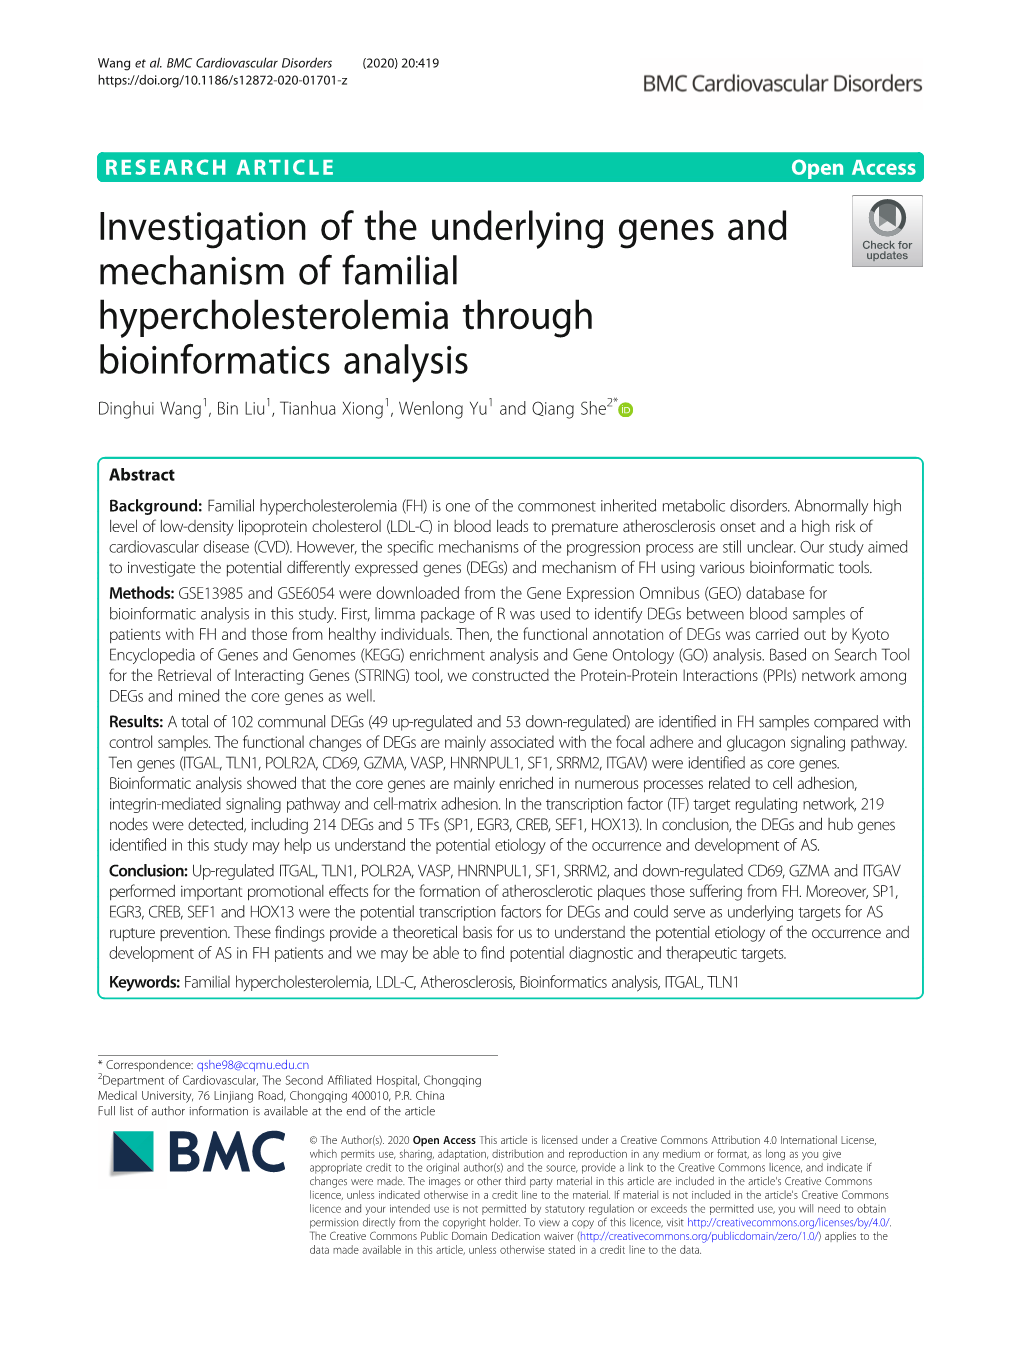 Investigation of the Underlying Genes and Mechanism of Familial Hypercholesterolemia Through Bioinformatics Analysis